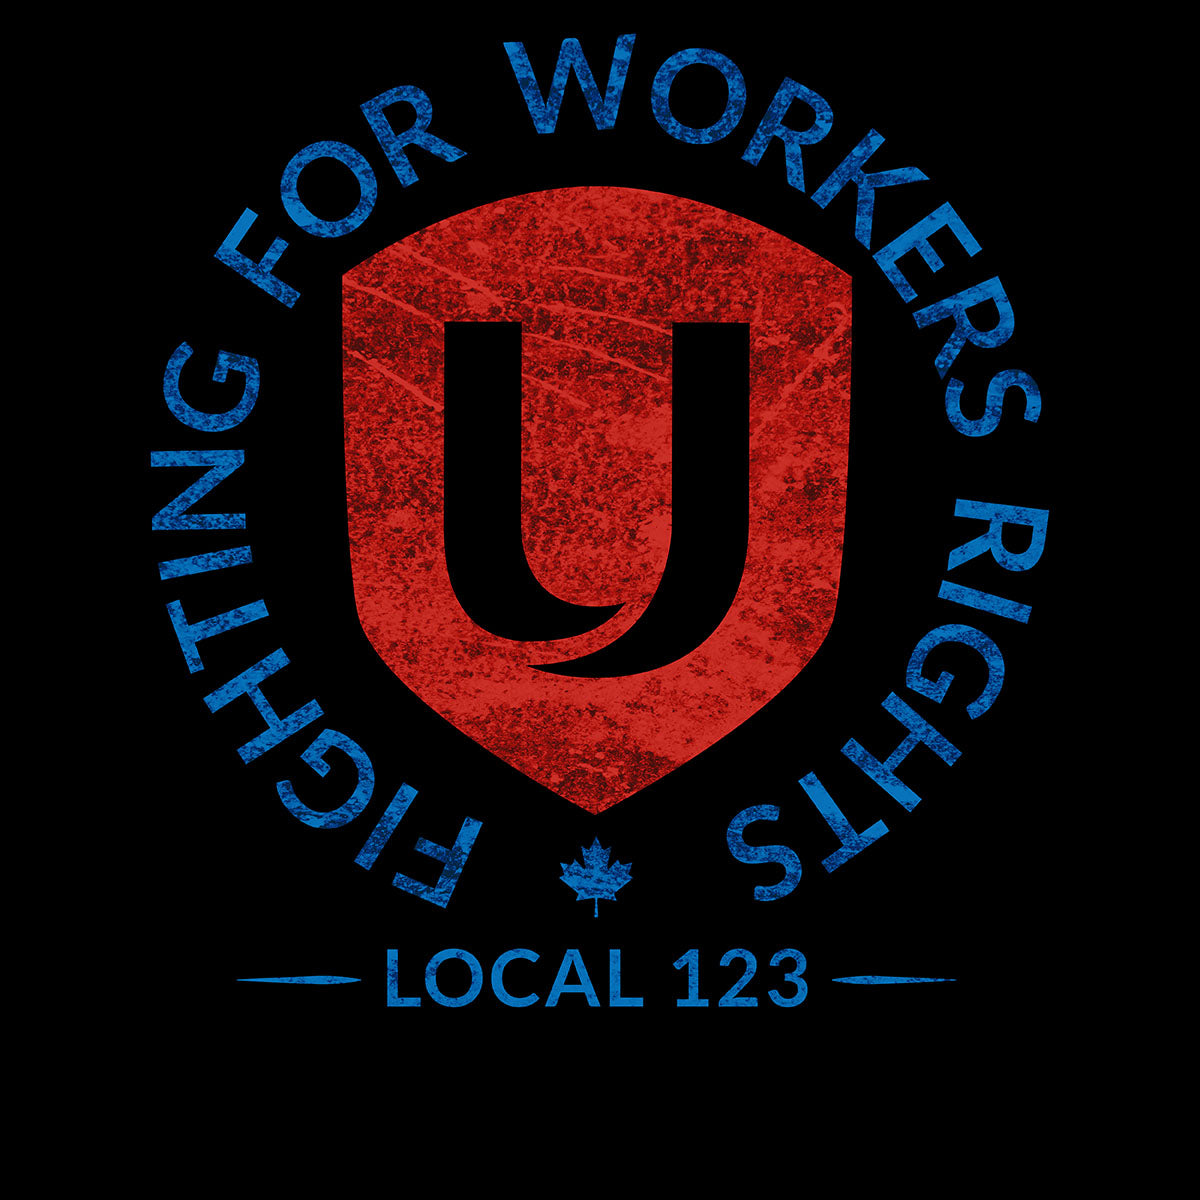 UNIFOR Workers Rights Decal